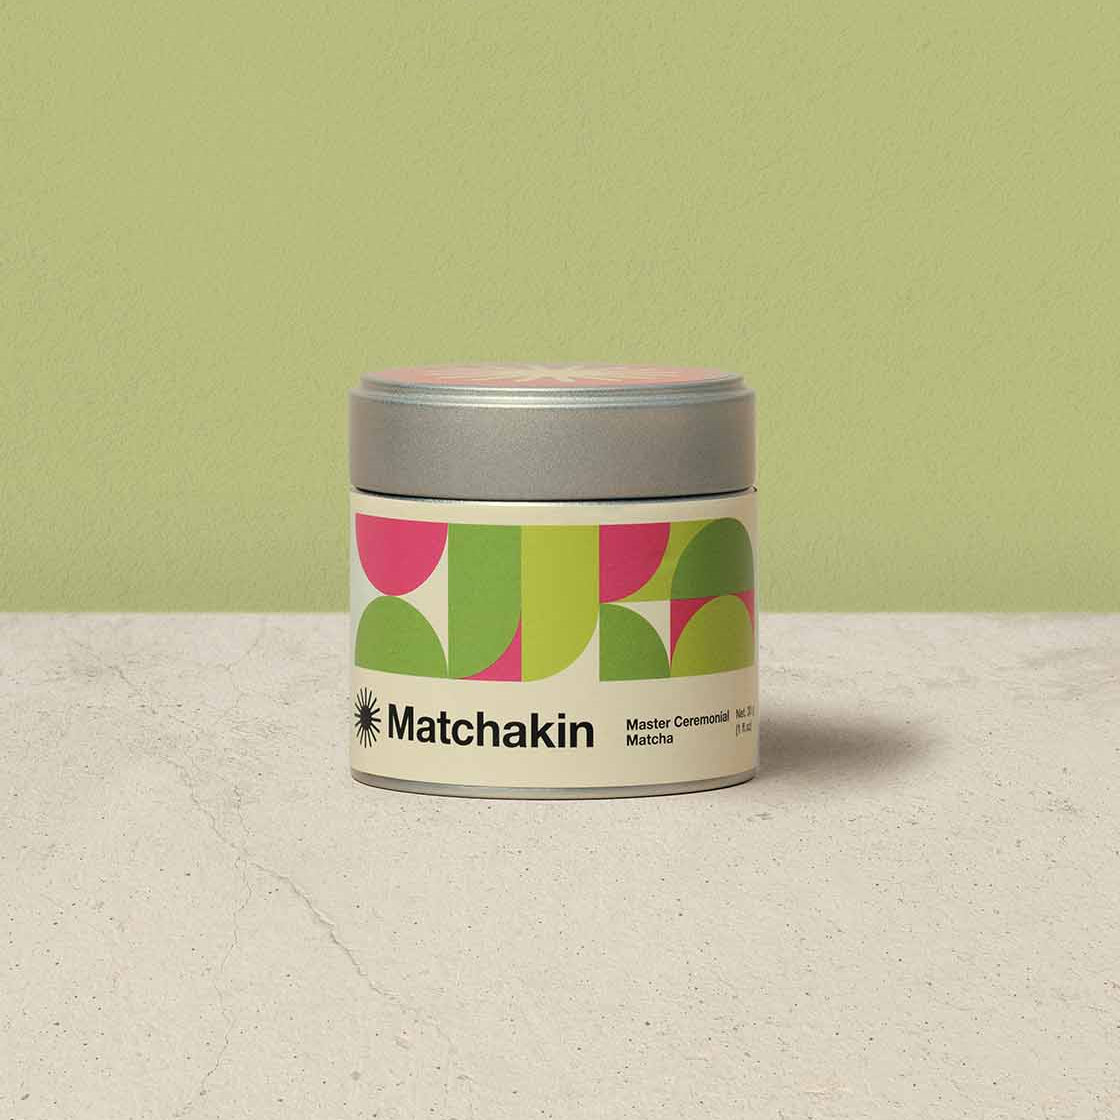 Master Ceremonial Matcha, made in Japan. An absolute gem of quality and taste, available only at Matchakin, 30 grams in tins